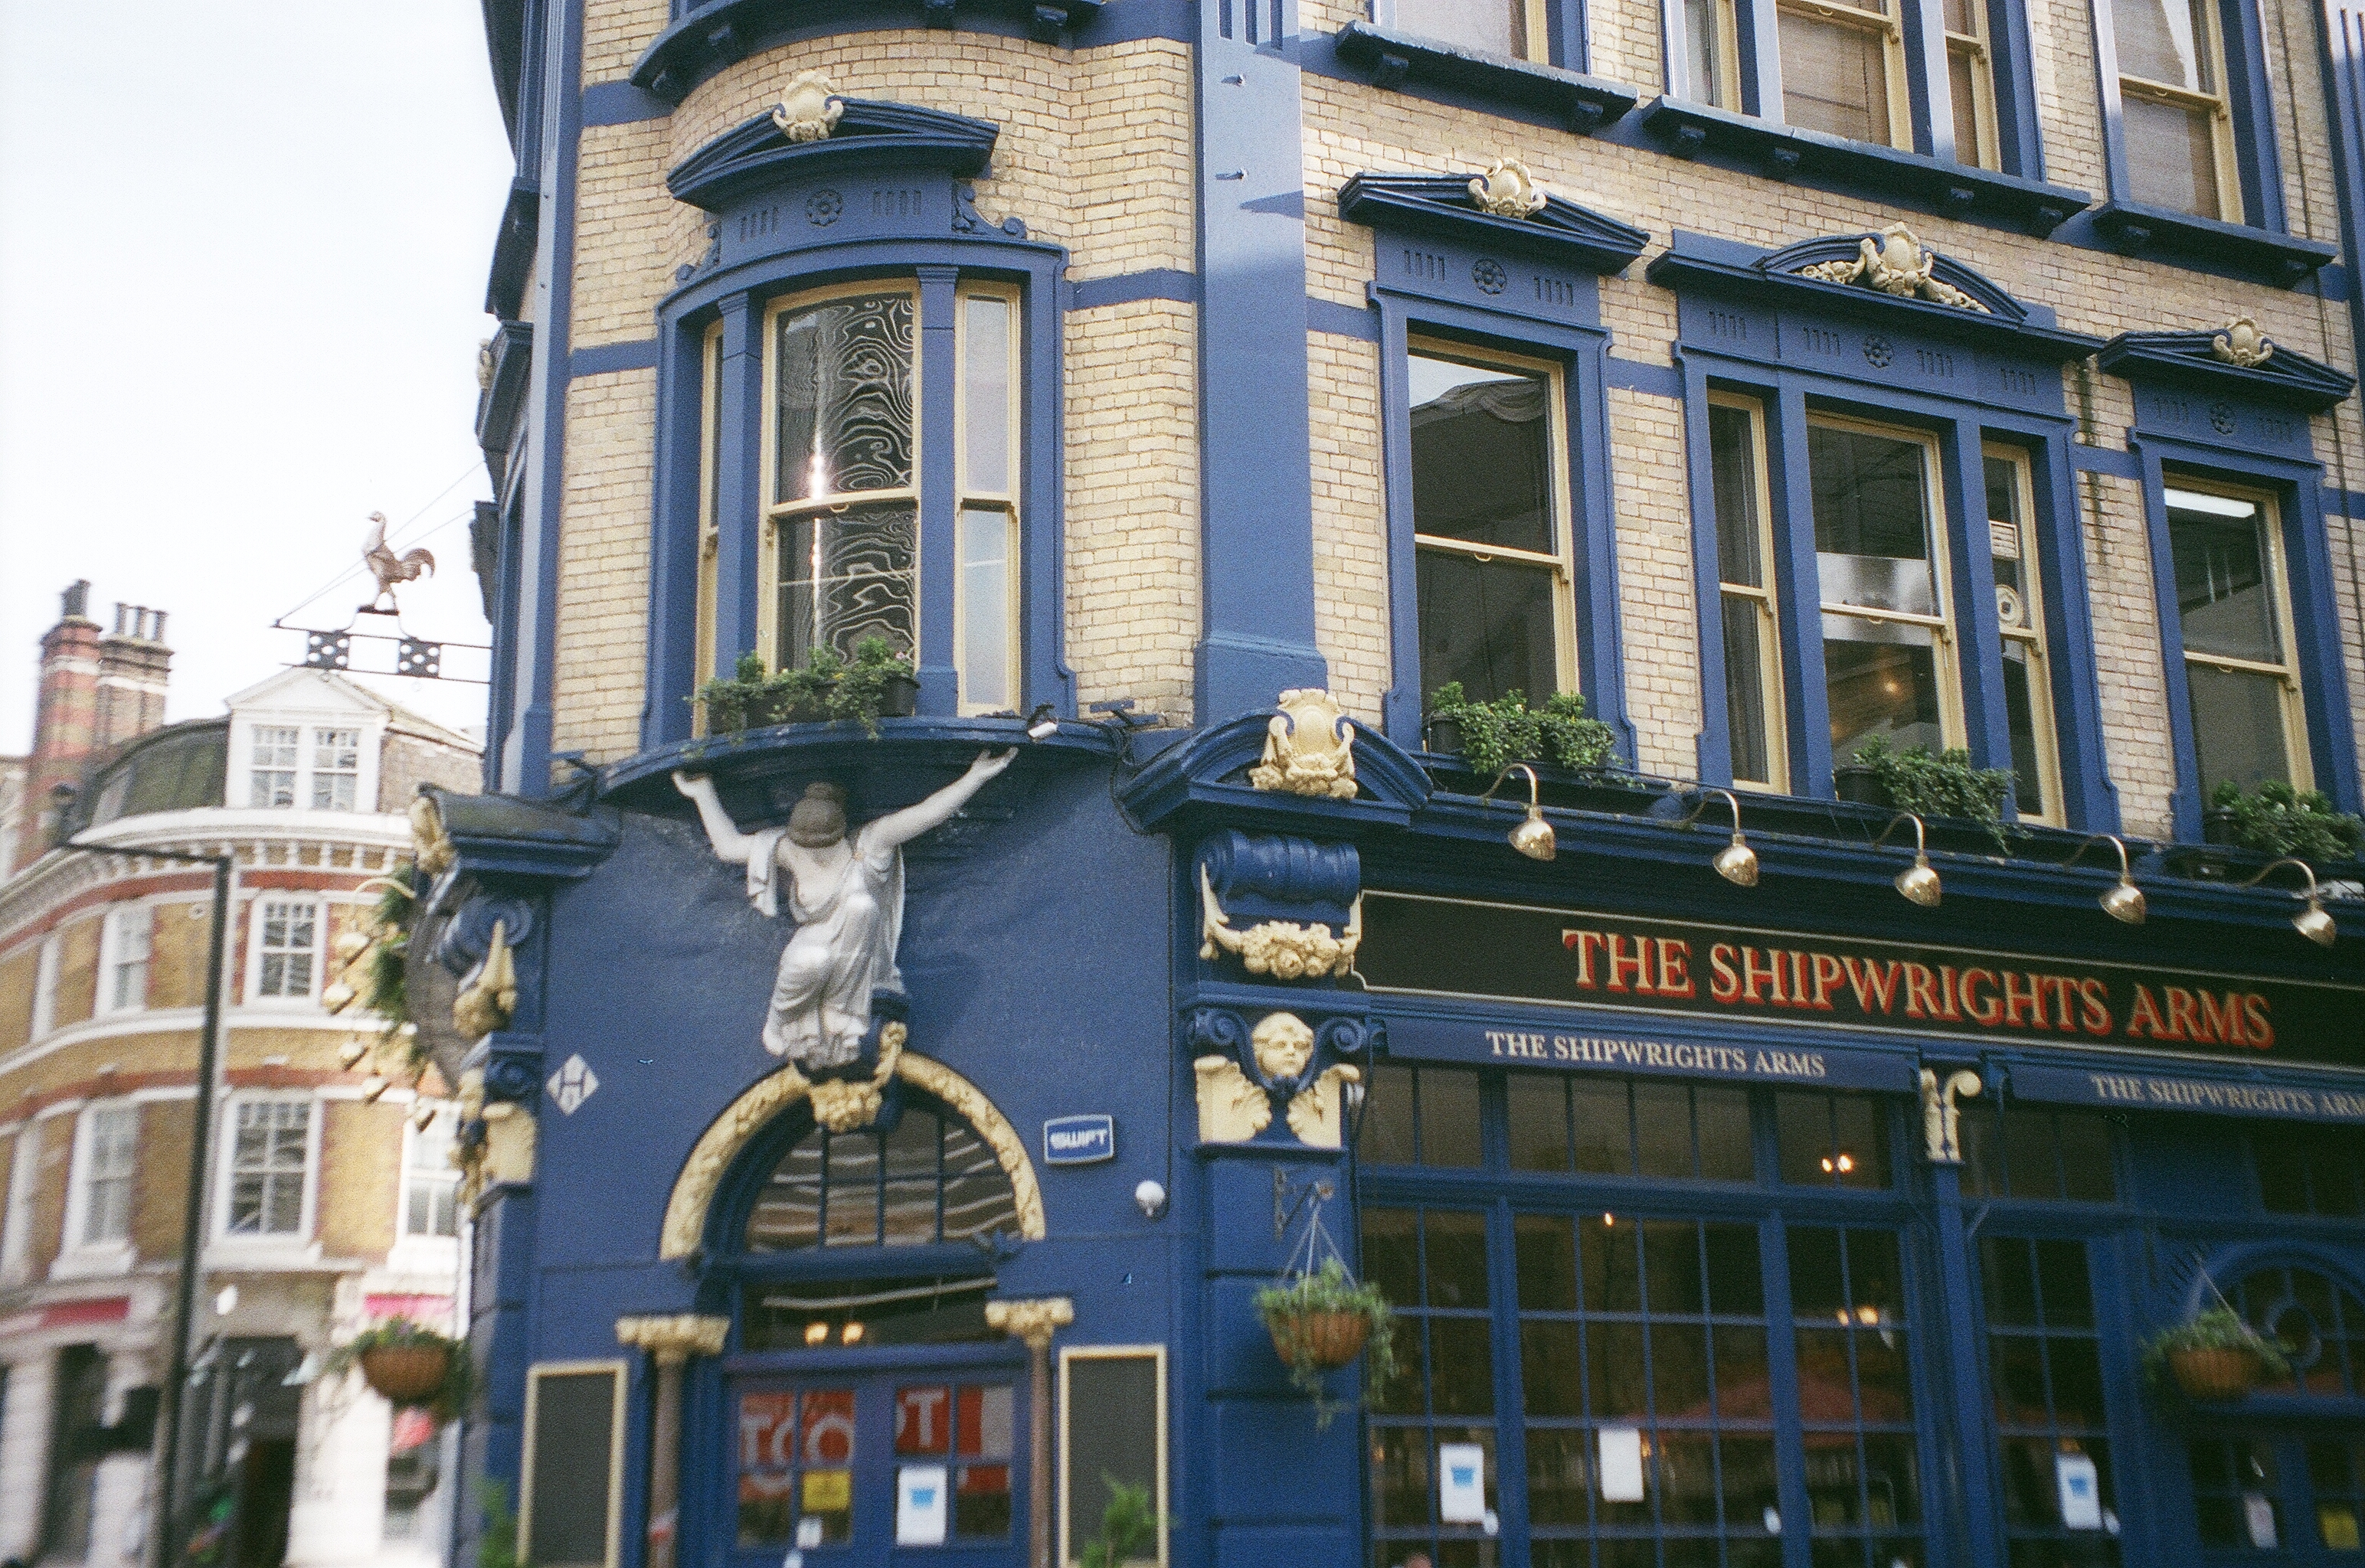 This image depicts a quaint pub in London, England, seemingly on a corner. The pub is a nice blue color and is called The Shipwrights Arms.